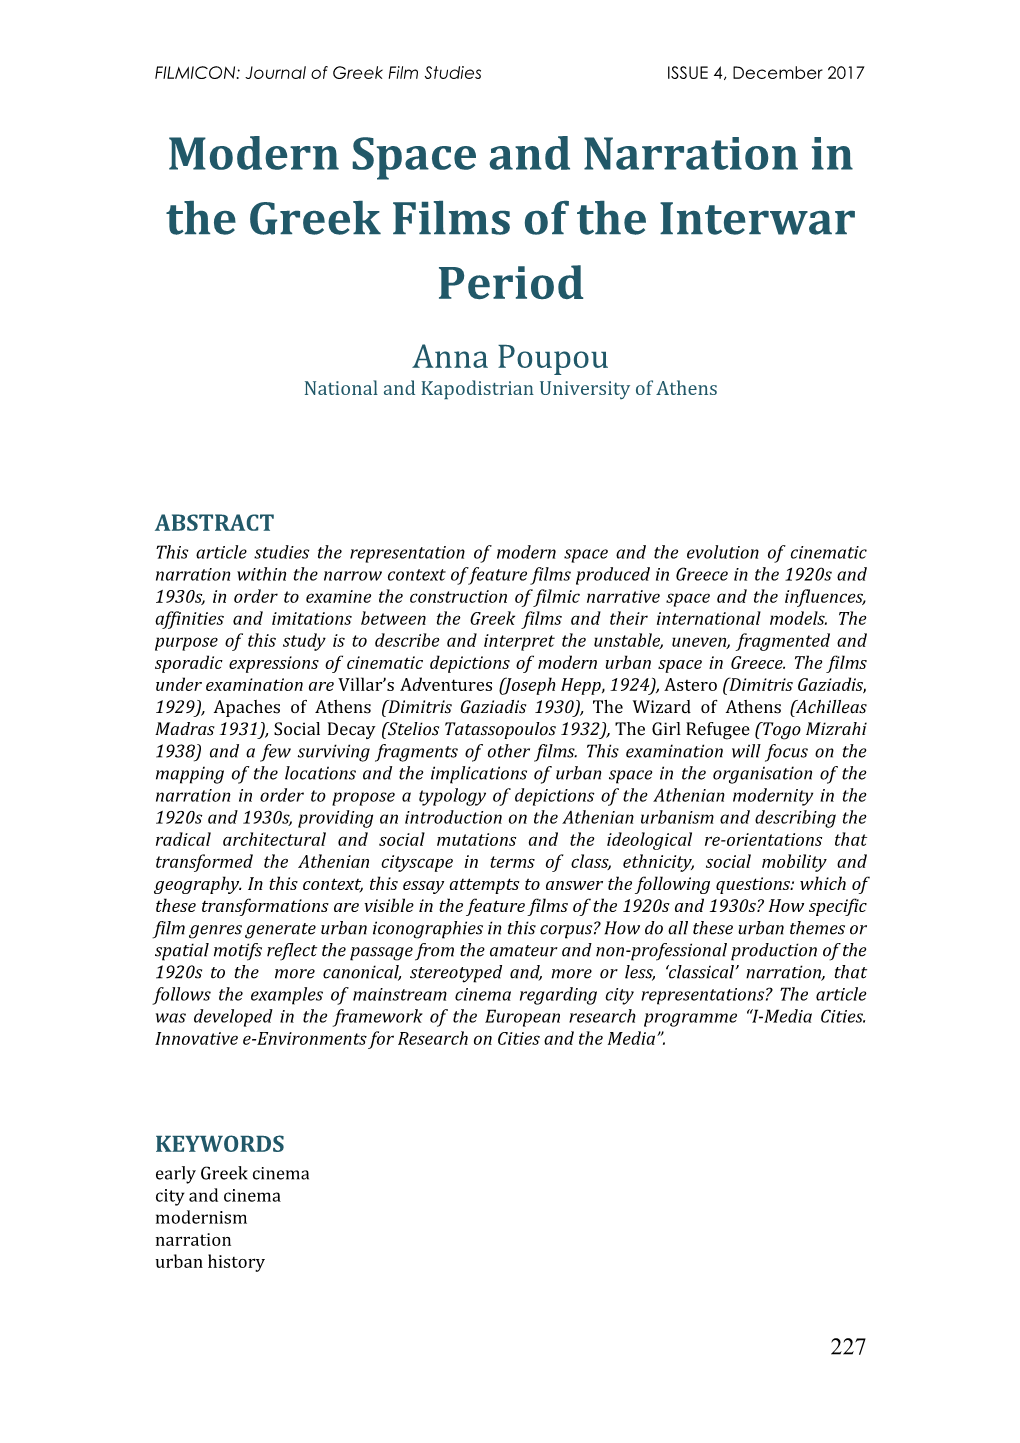 Modern Space and Narration in the Greek Films of the Interwar Period Anna Poupou National and Kapodistrian University of Athens